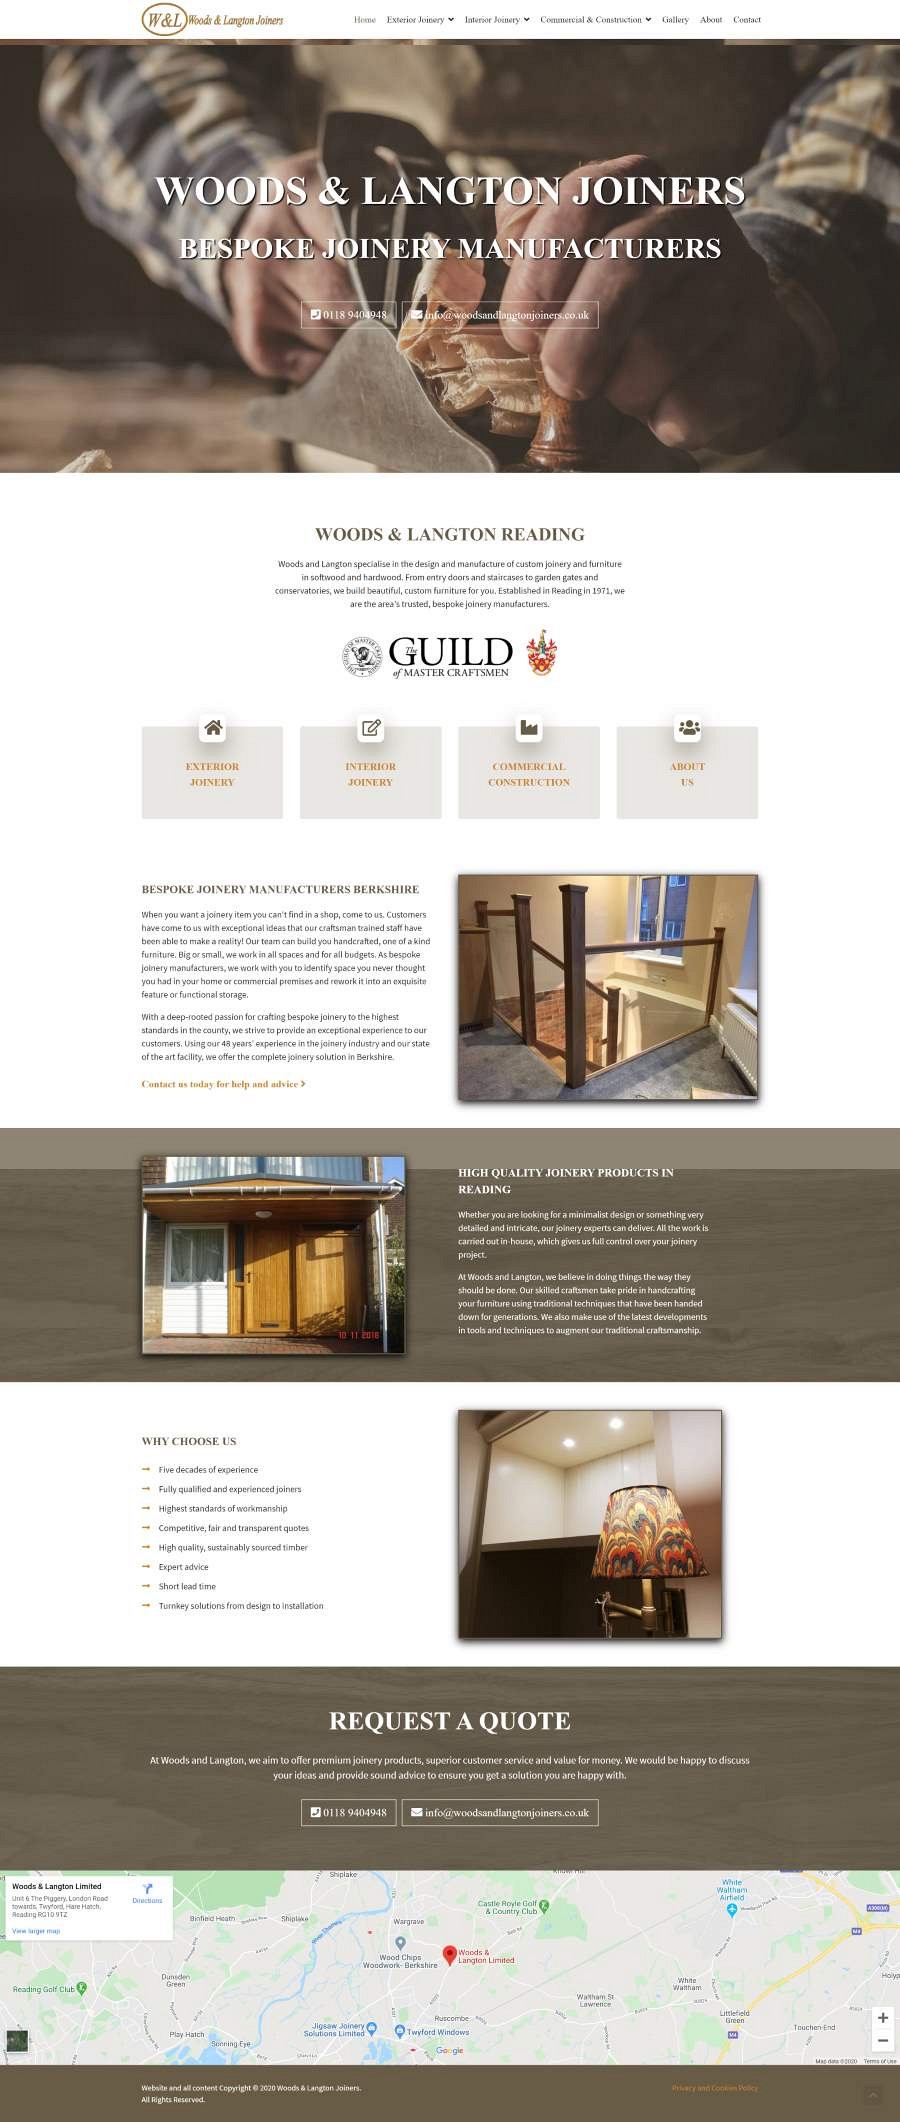 Woods & Langton Joinery